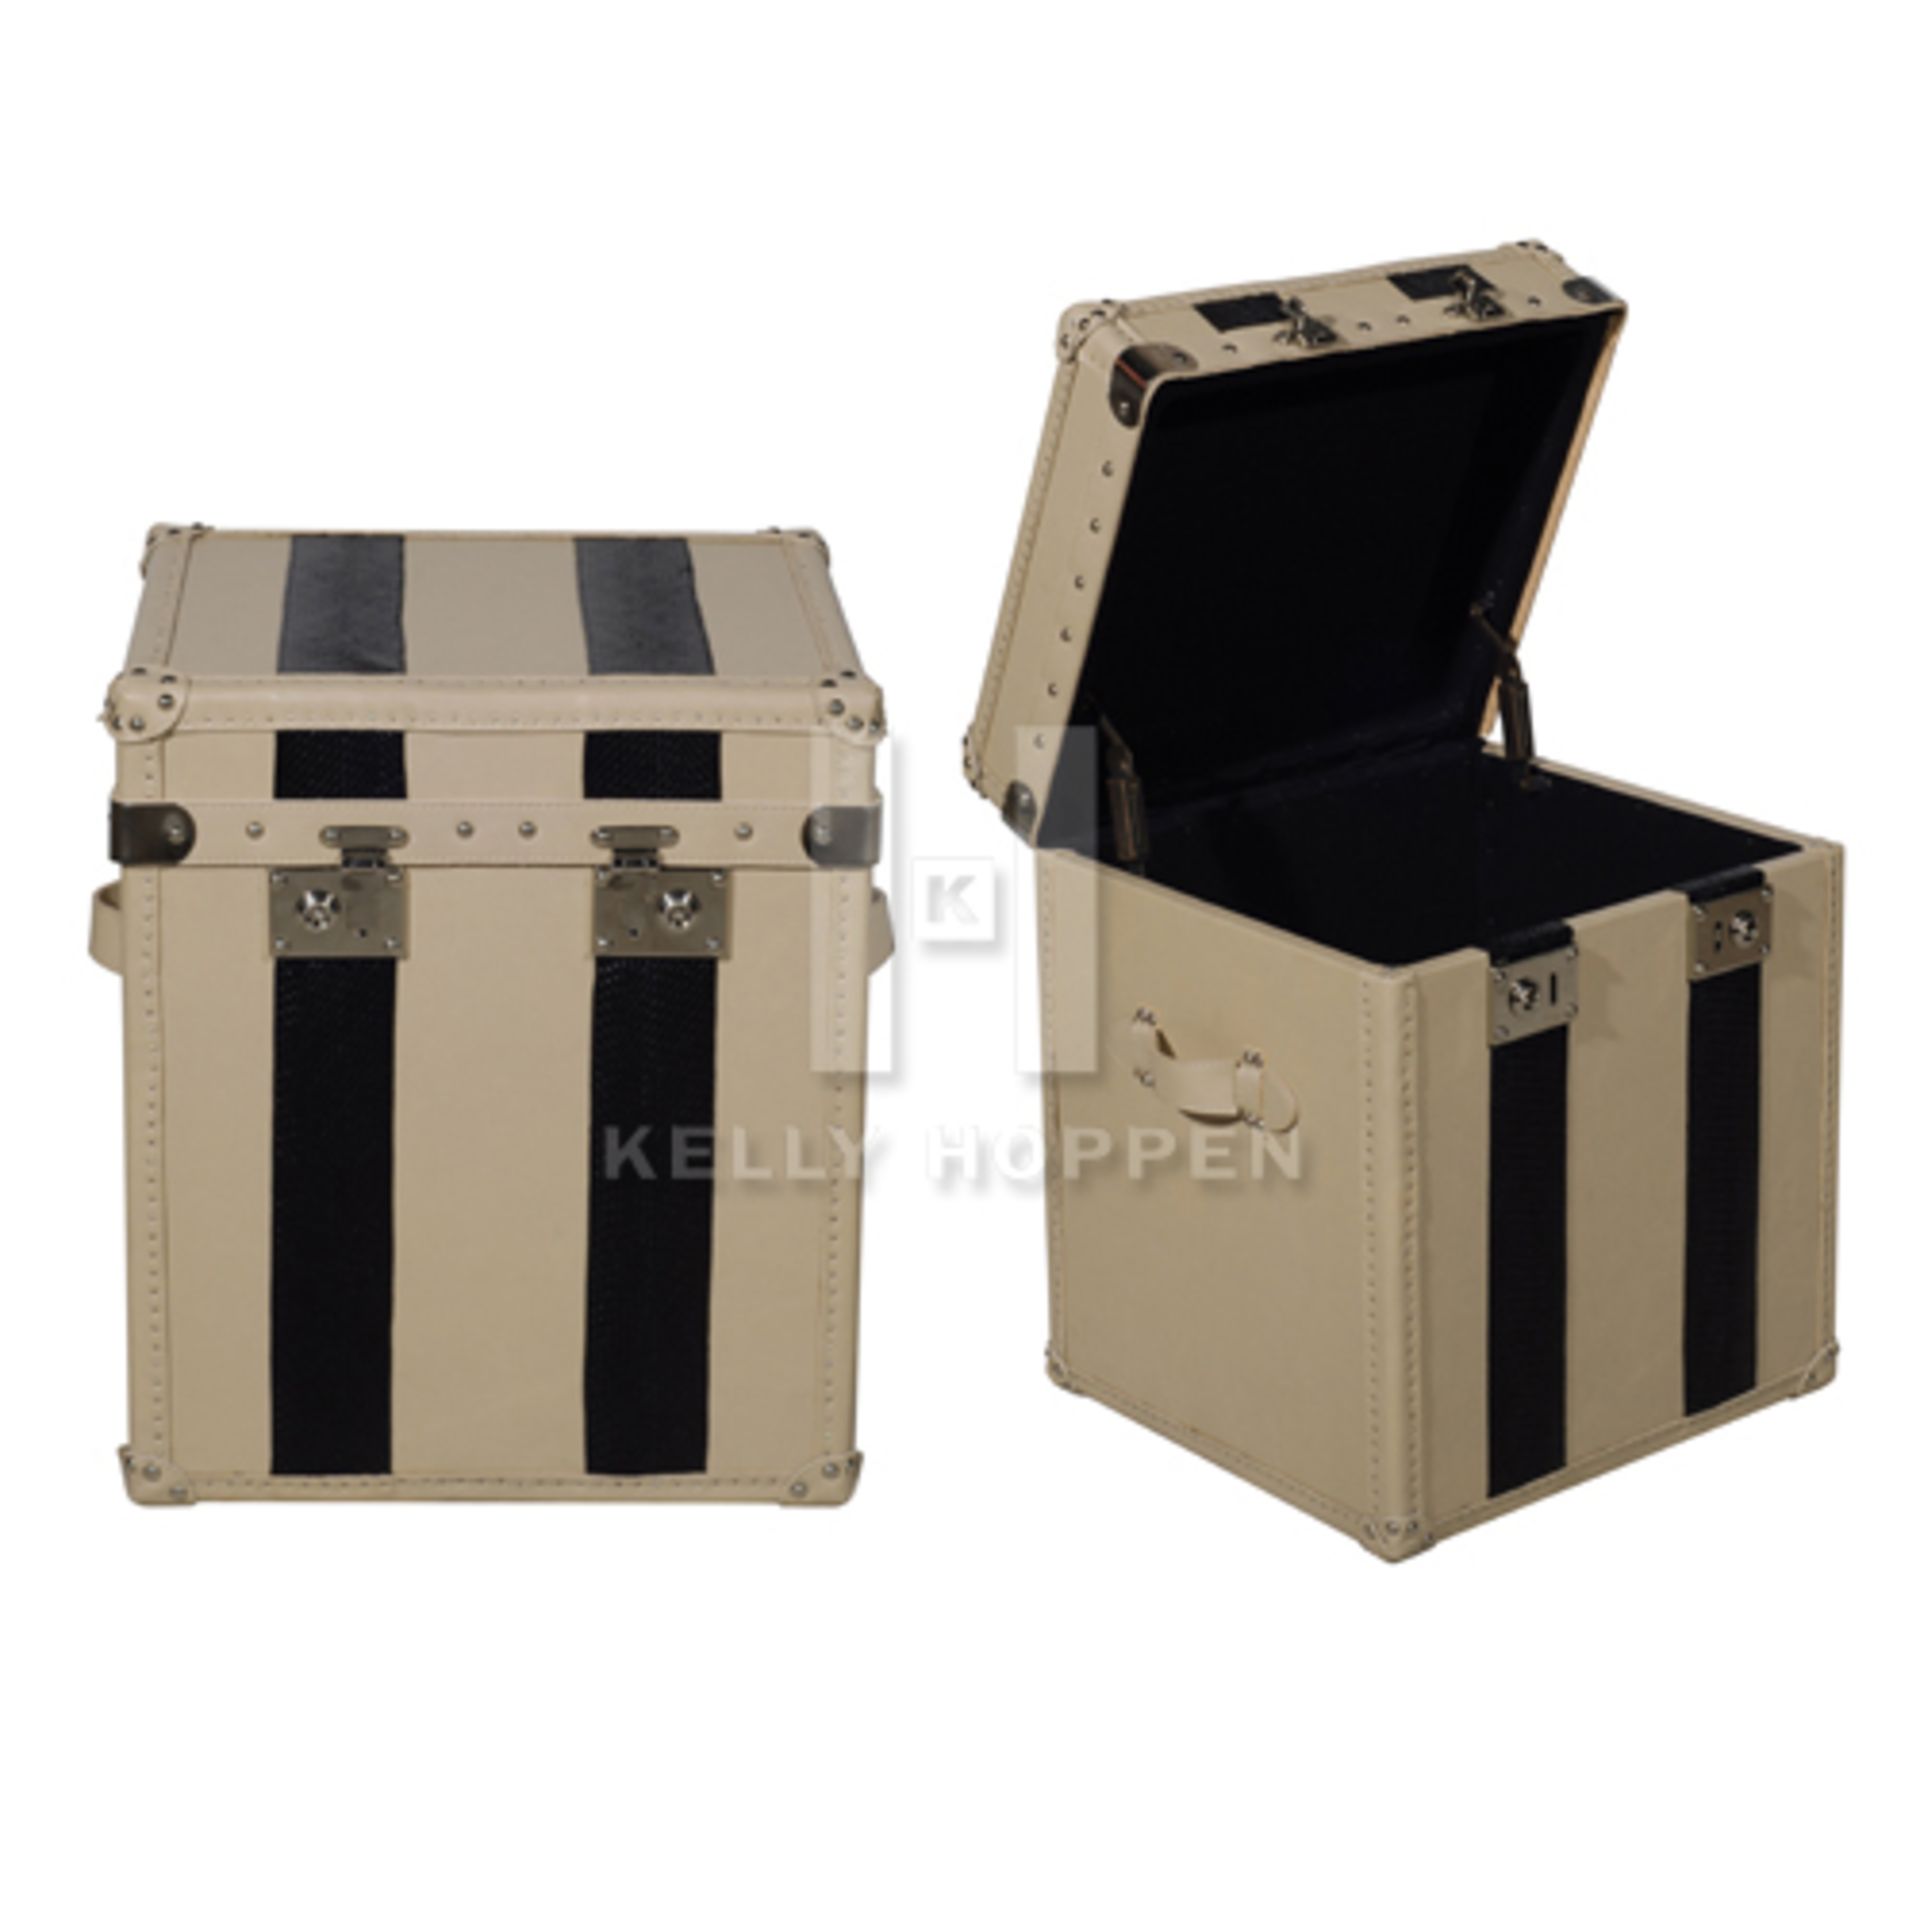 10 Trunk Small All Leather Sand Black Bands 49 5 X 45 X 57 5cm